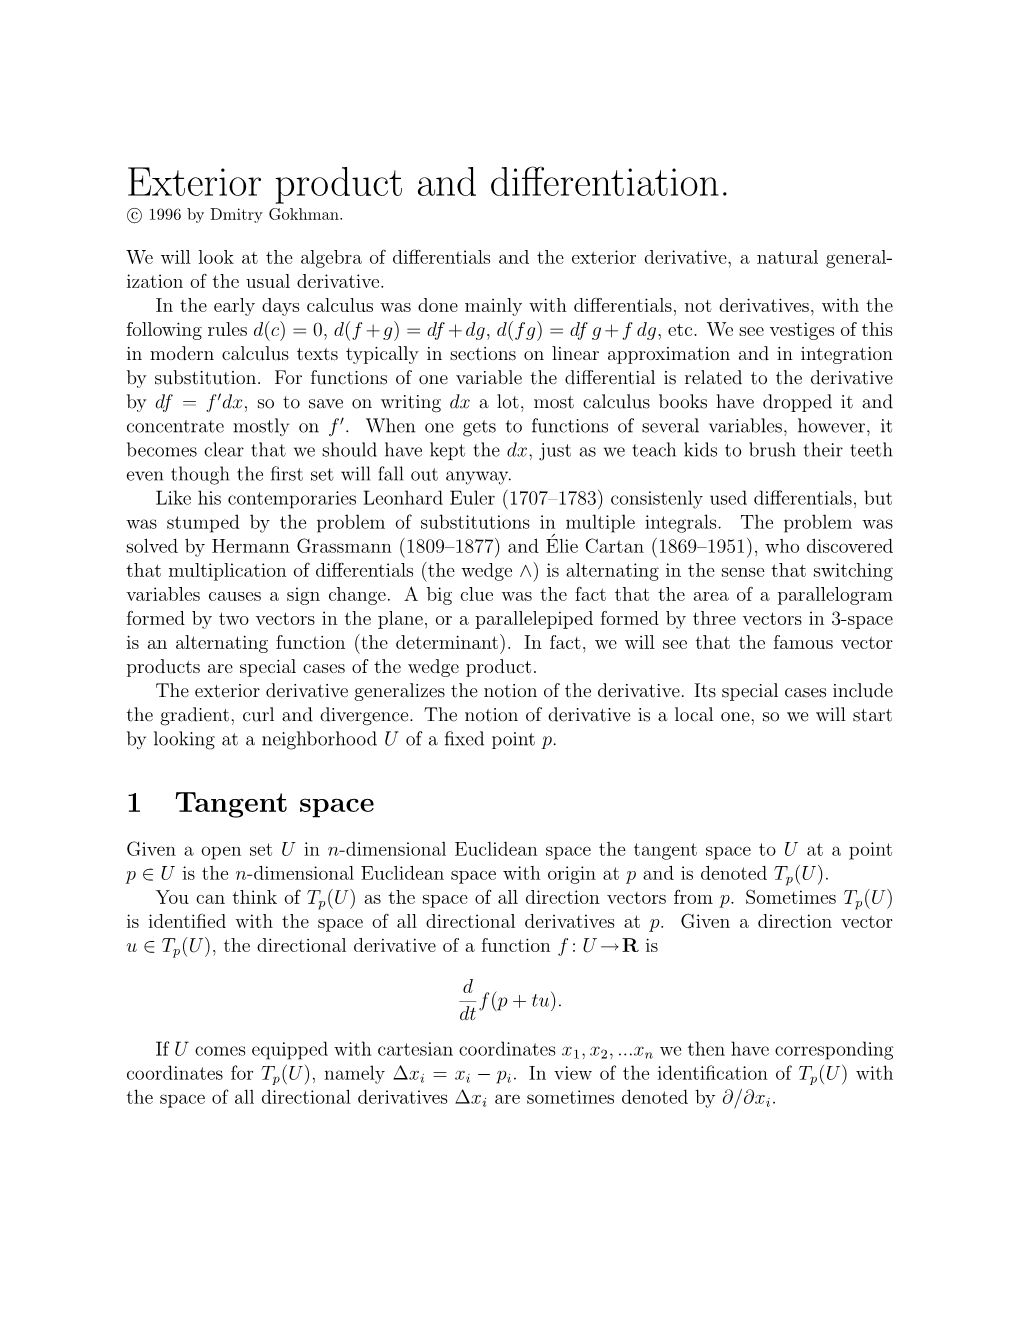 Exterior Product and Differentiation